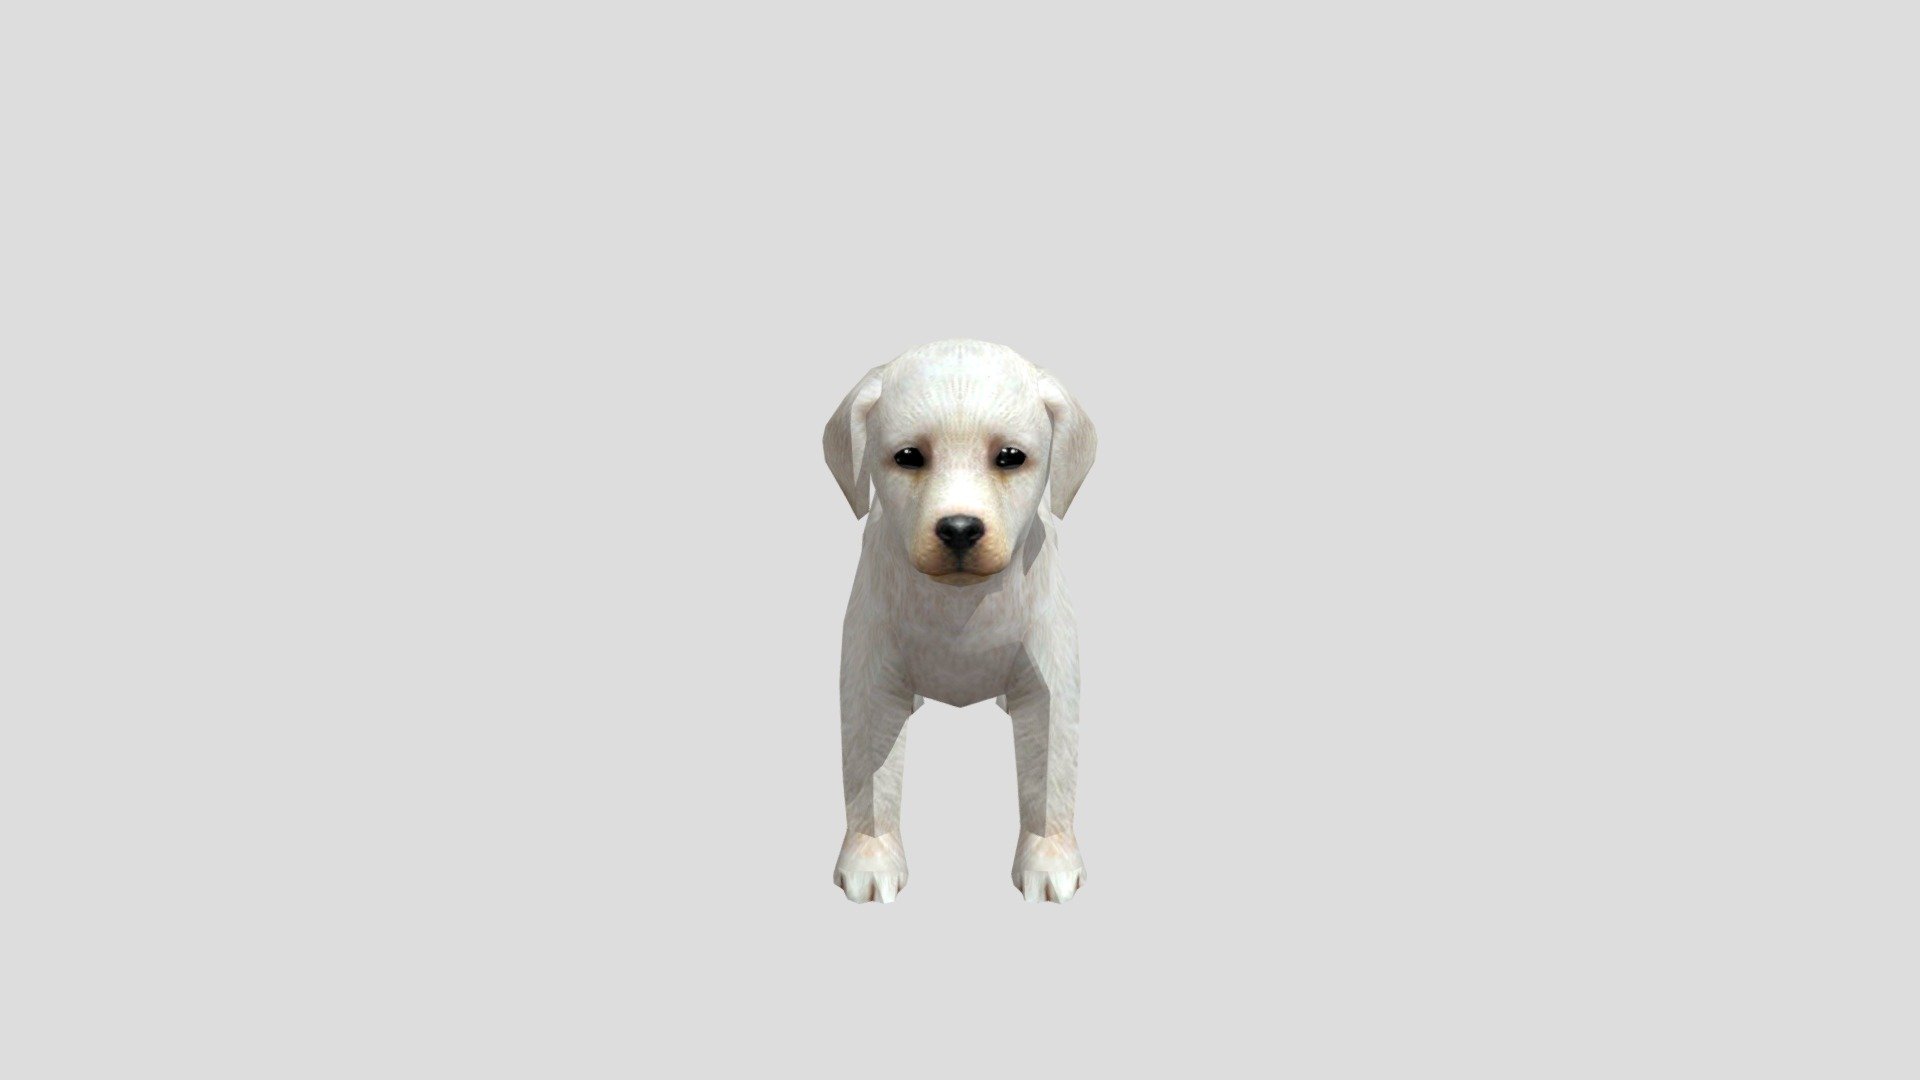 qwsdfdeswaqsdfghxcv - Labrador-retriever-puppy - Download Free 3D model by tewrwfwff 3d model